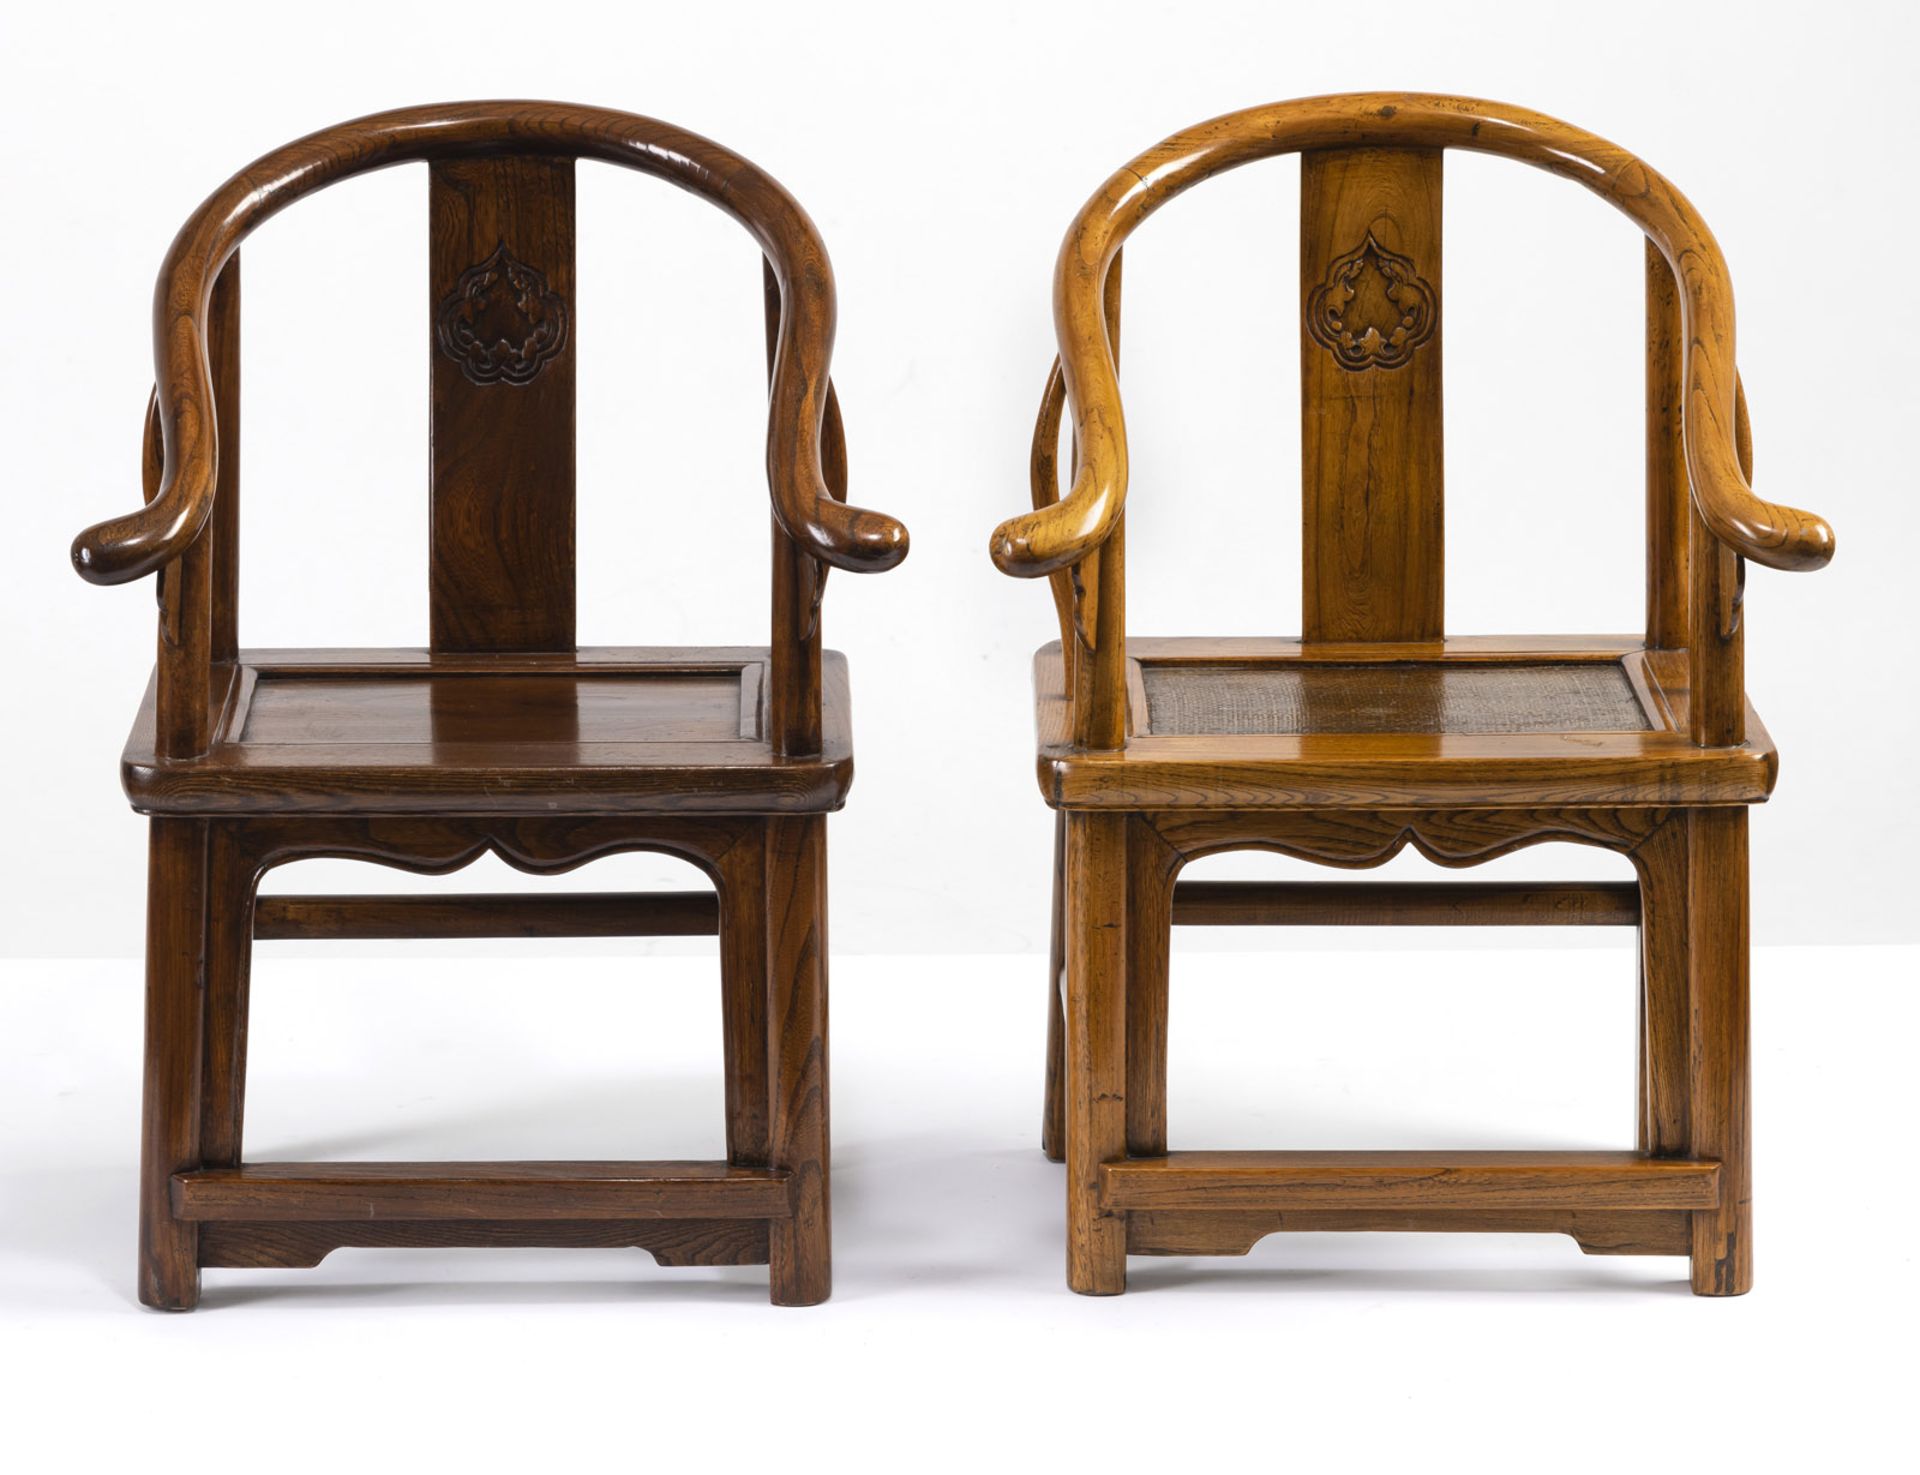 TWO WOODEN HORSESHOE-BACK ARMCHAIRS FOR CHILDREN - Image 2 of 5